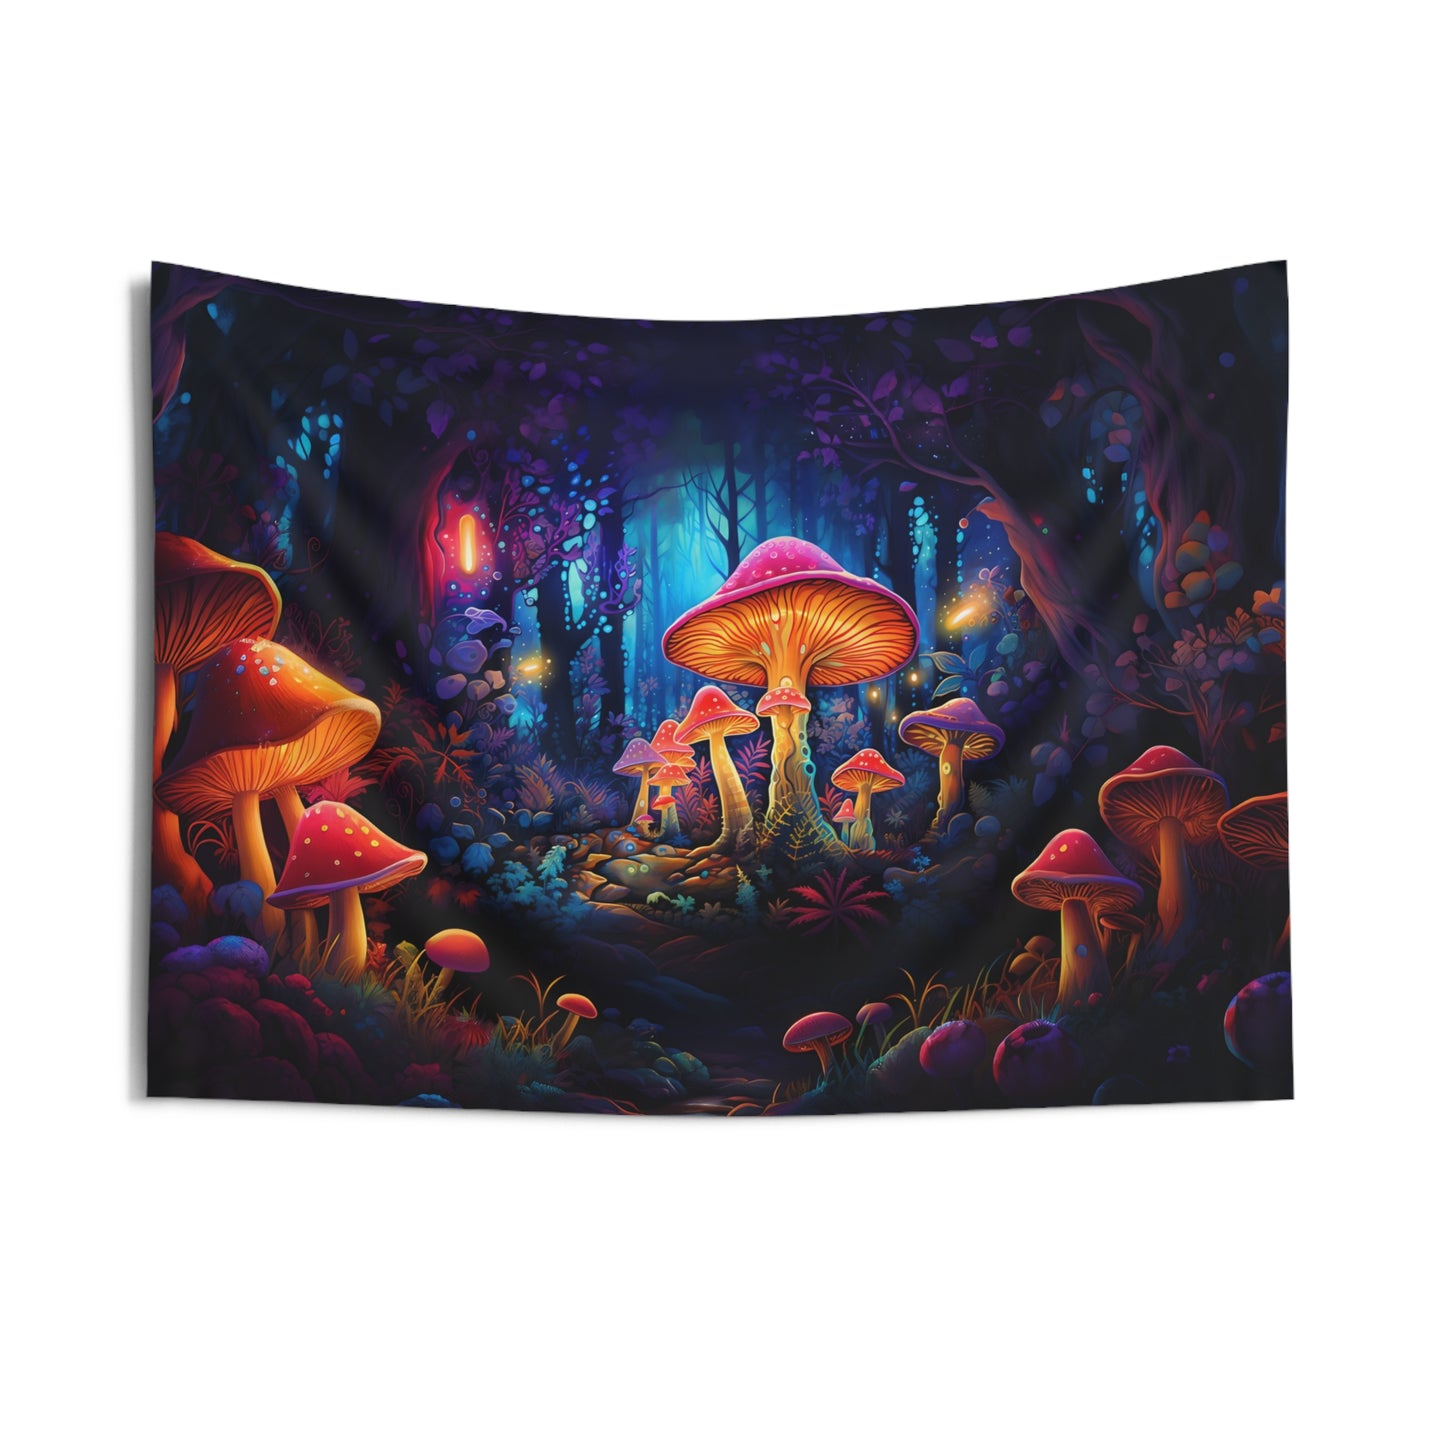 Mystical Forest Glow Mushroom Tapestry | Living Room, College Dorm | Witchy, Cottagecore, Goblincore Aesthetic | Gift Idea